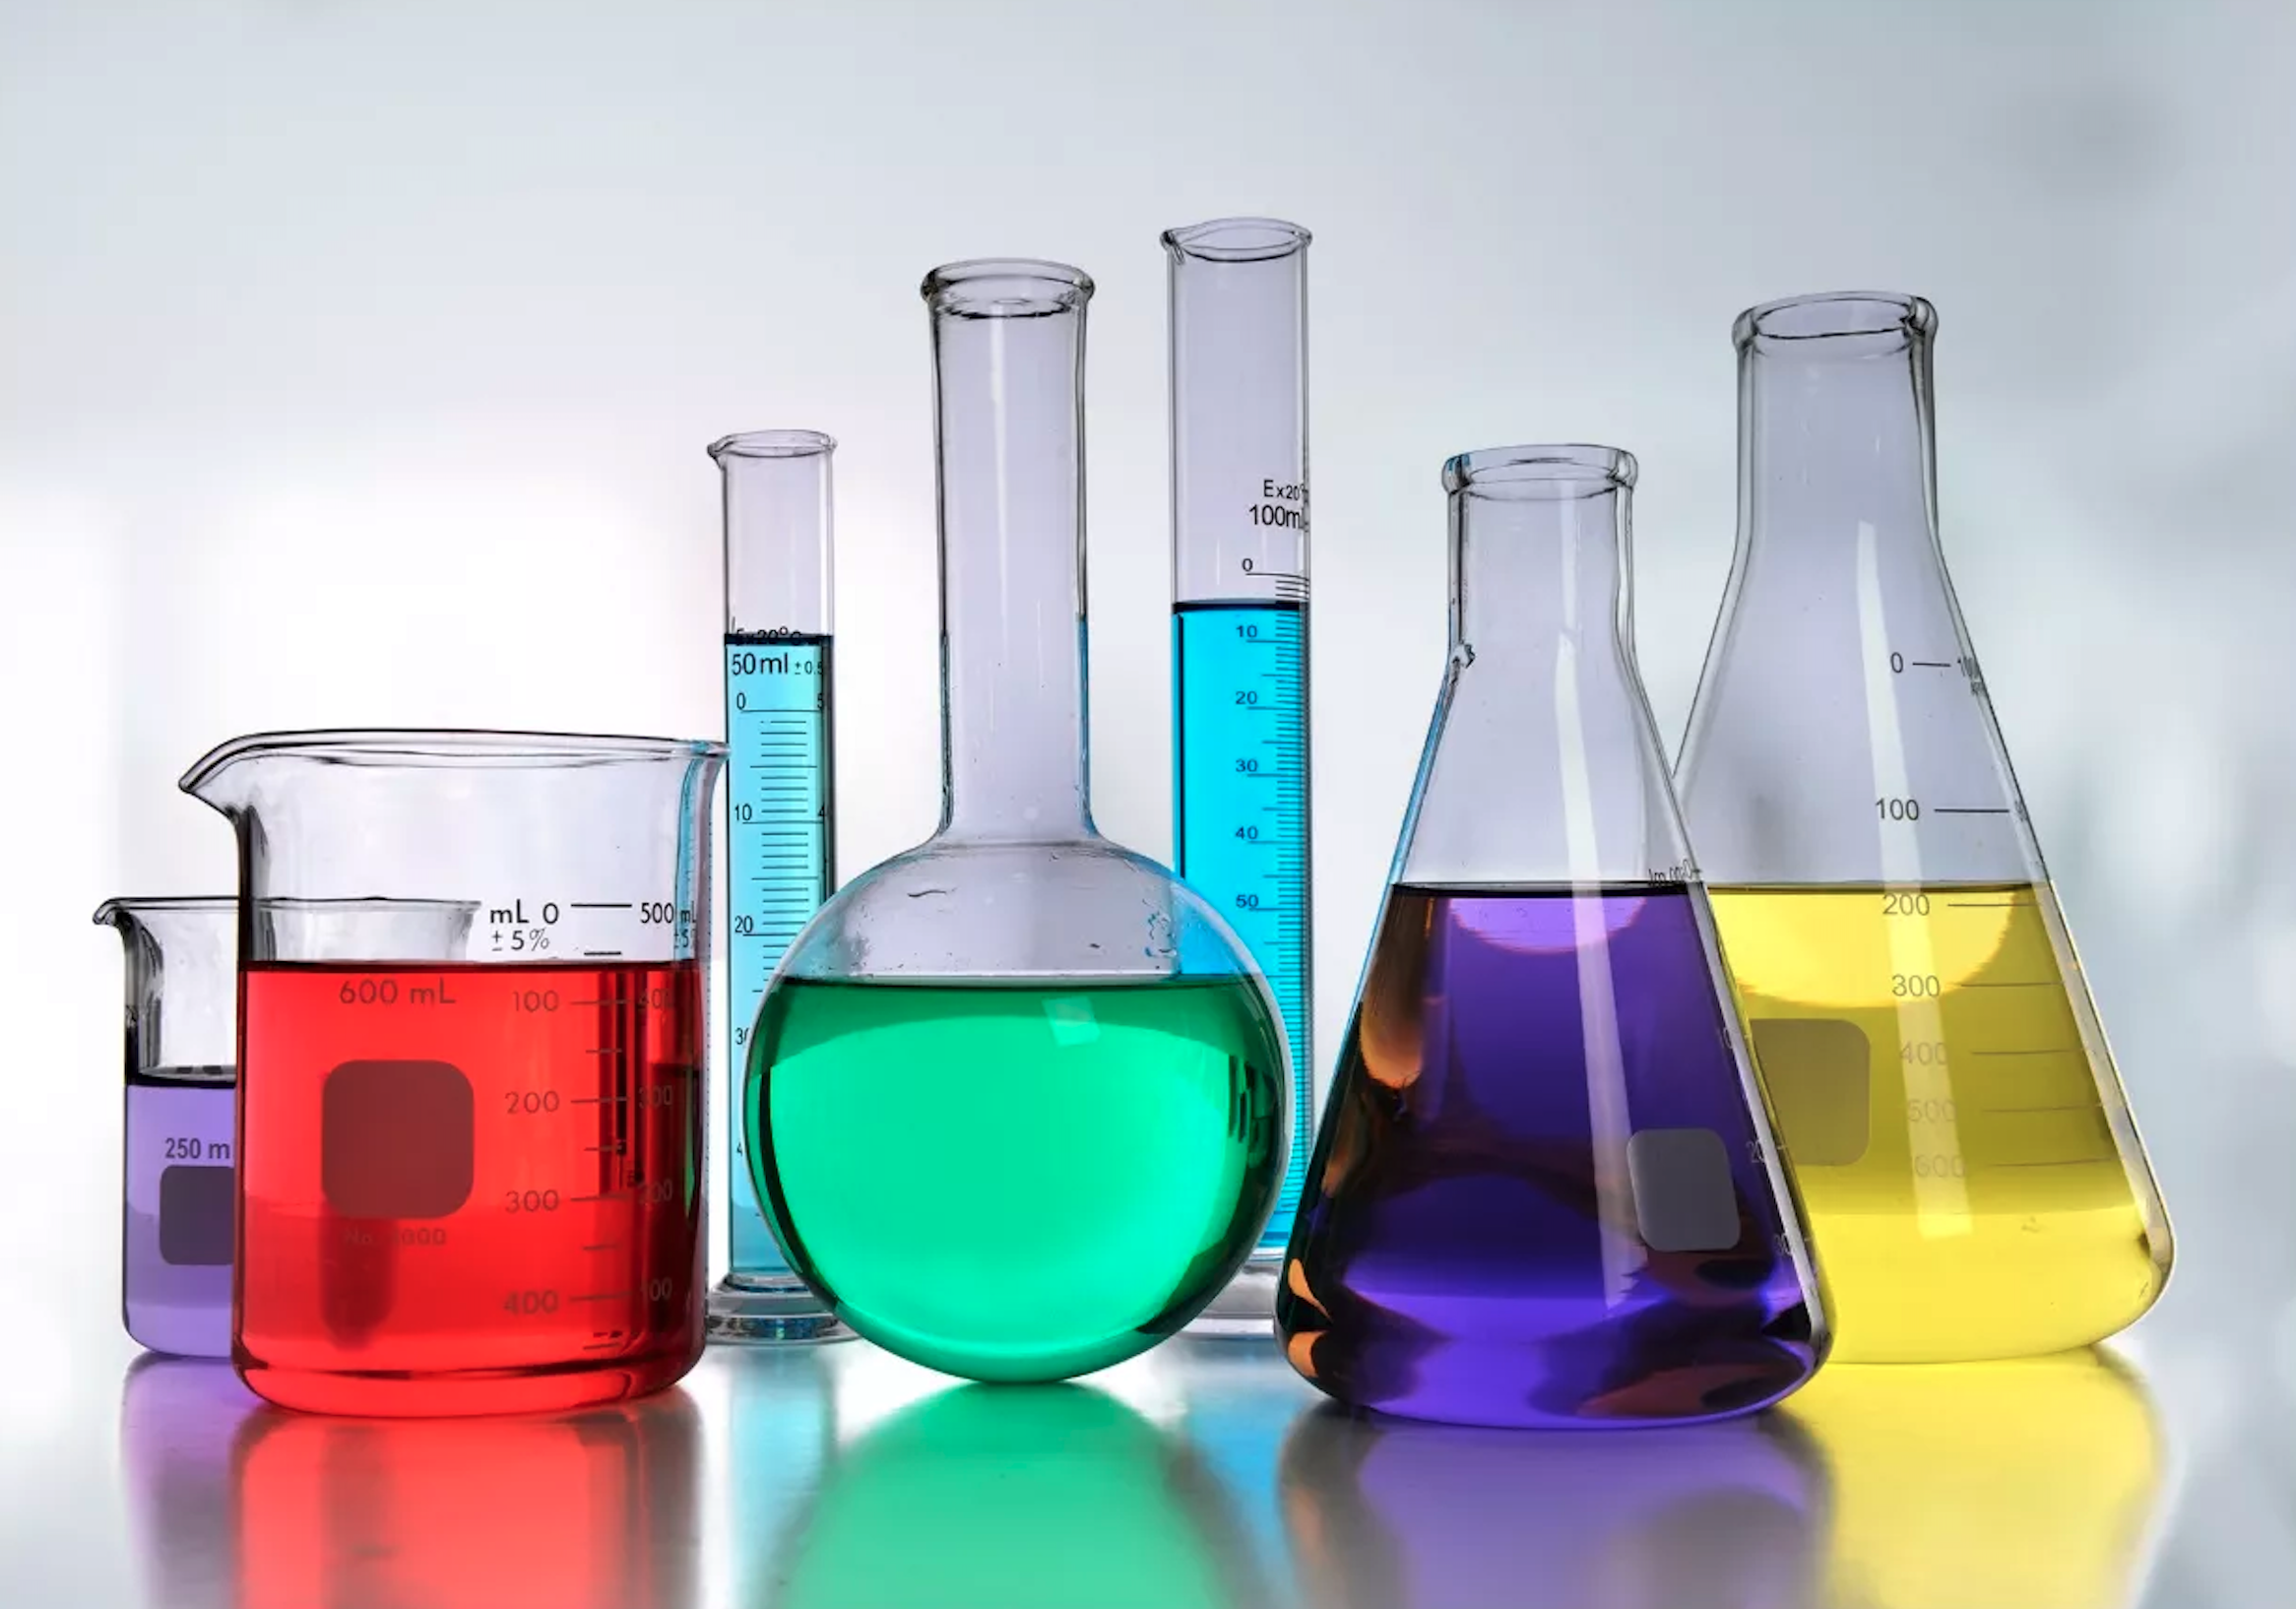  Specialty Chemicals products suppliers and distributor Company